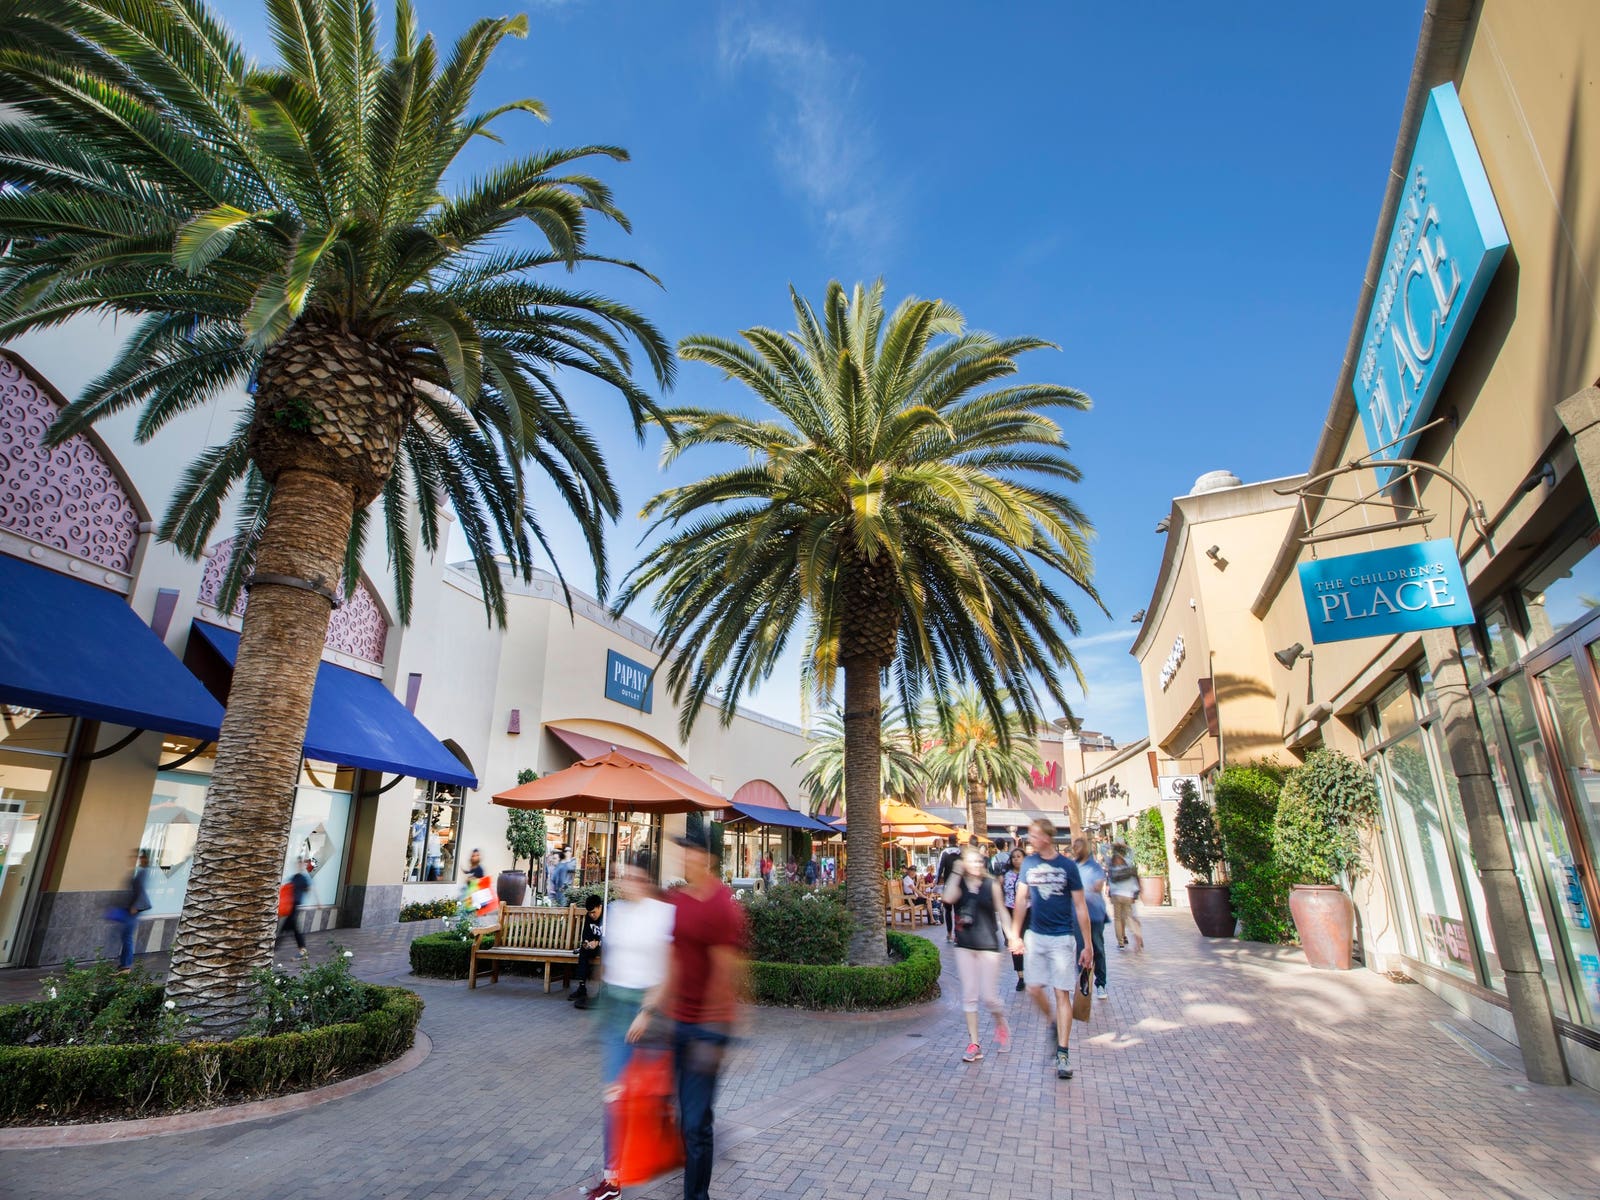 Citadel Outlets | Discover Los Angeles